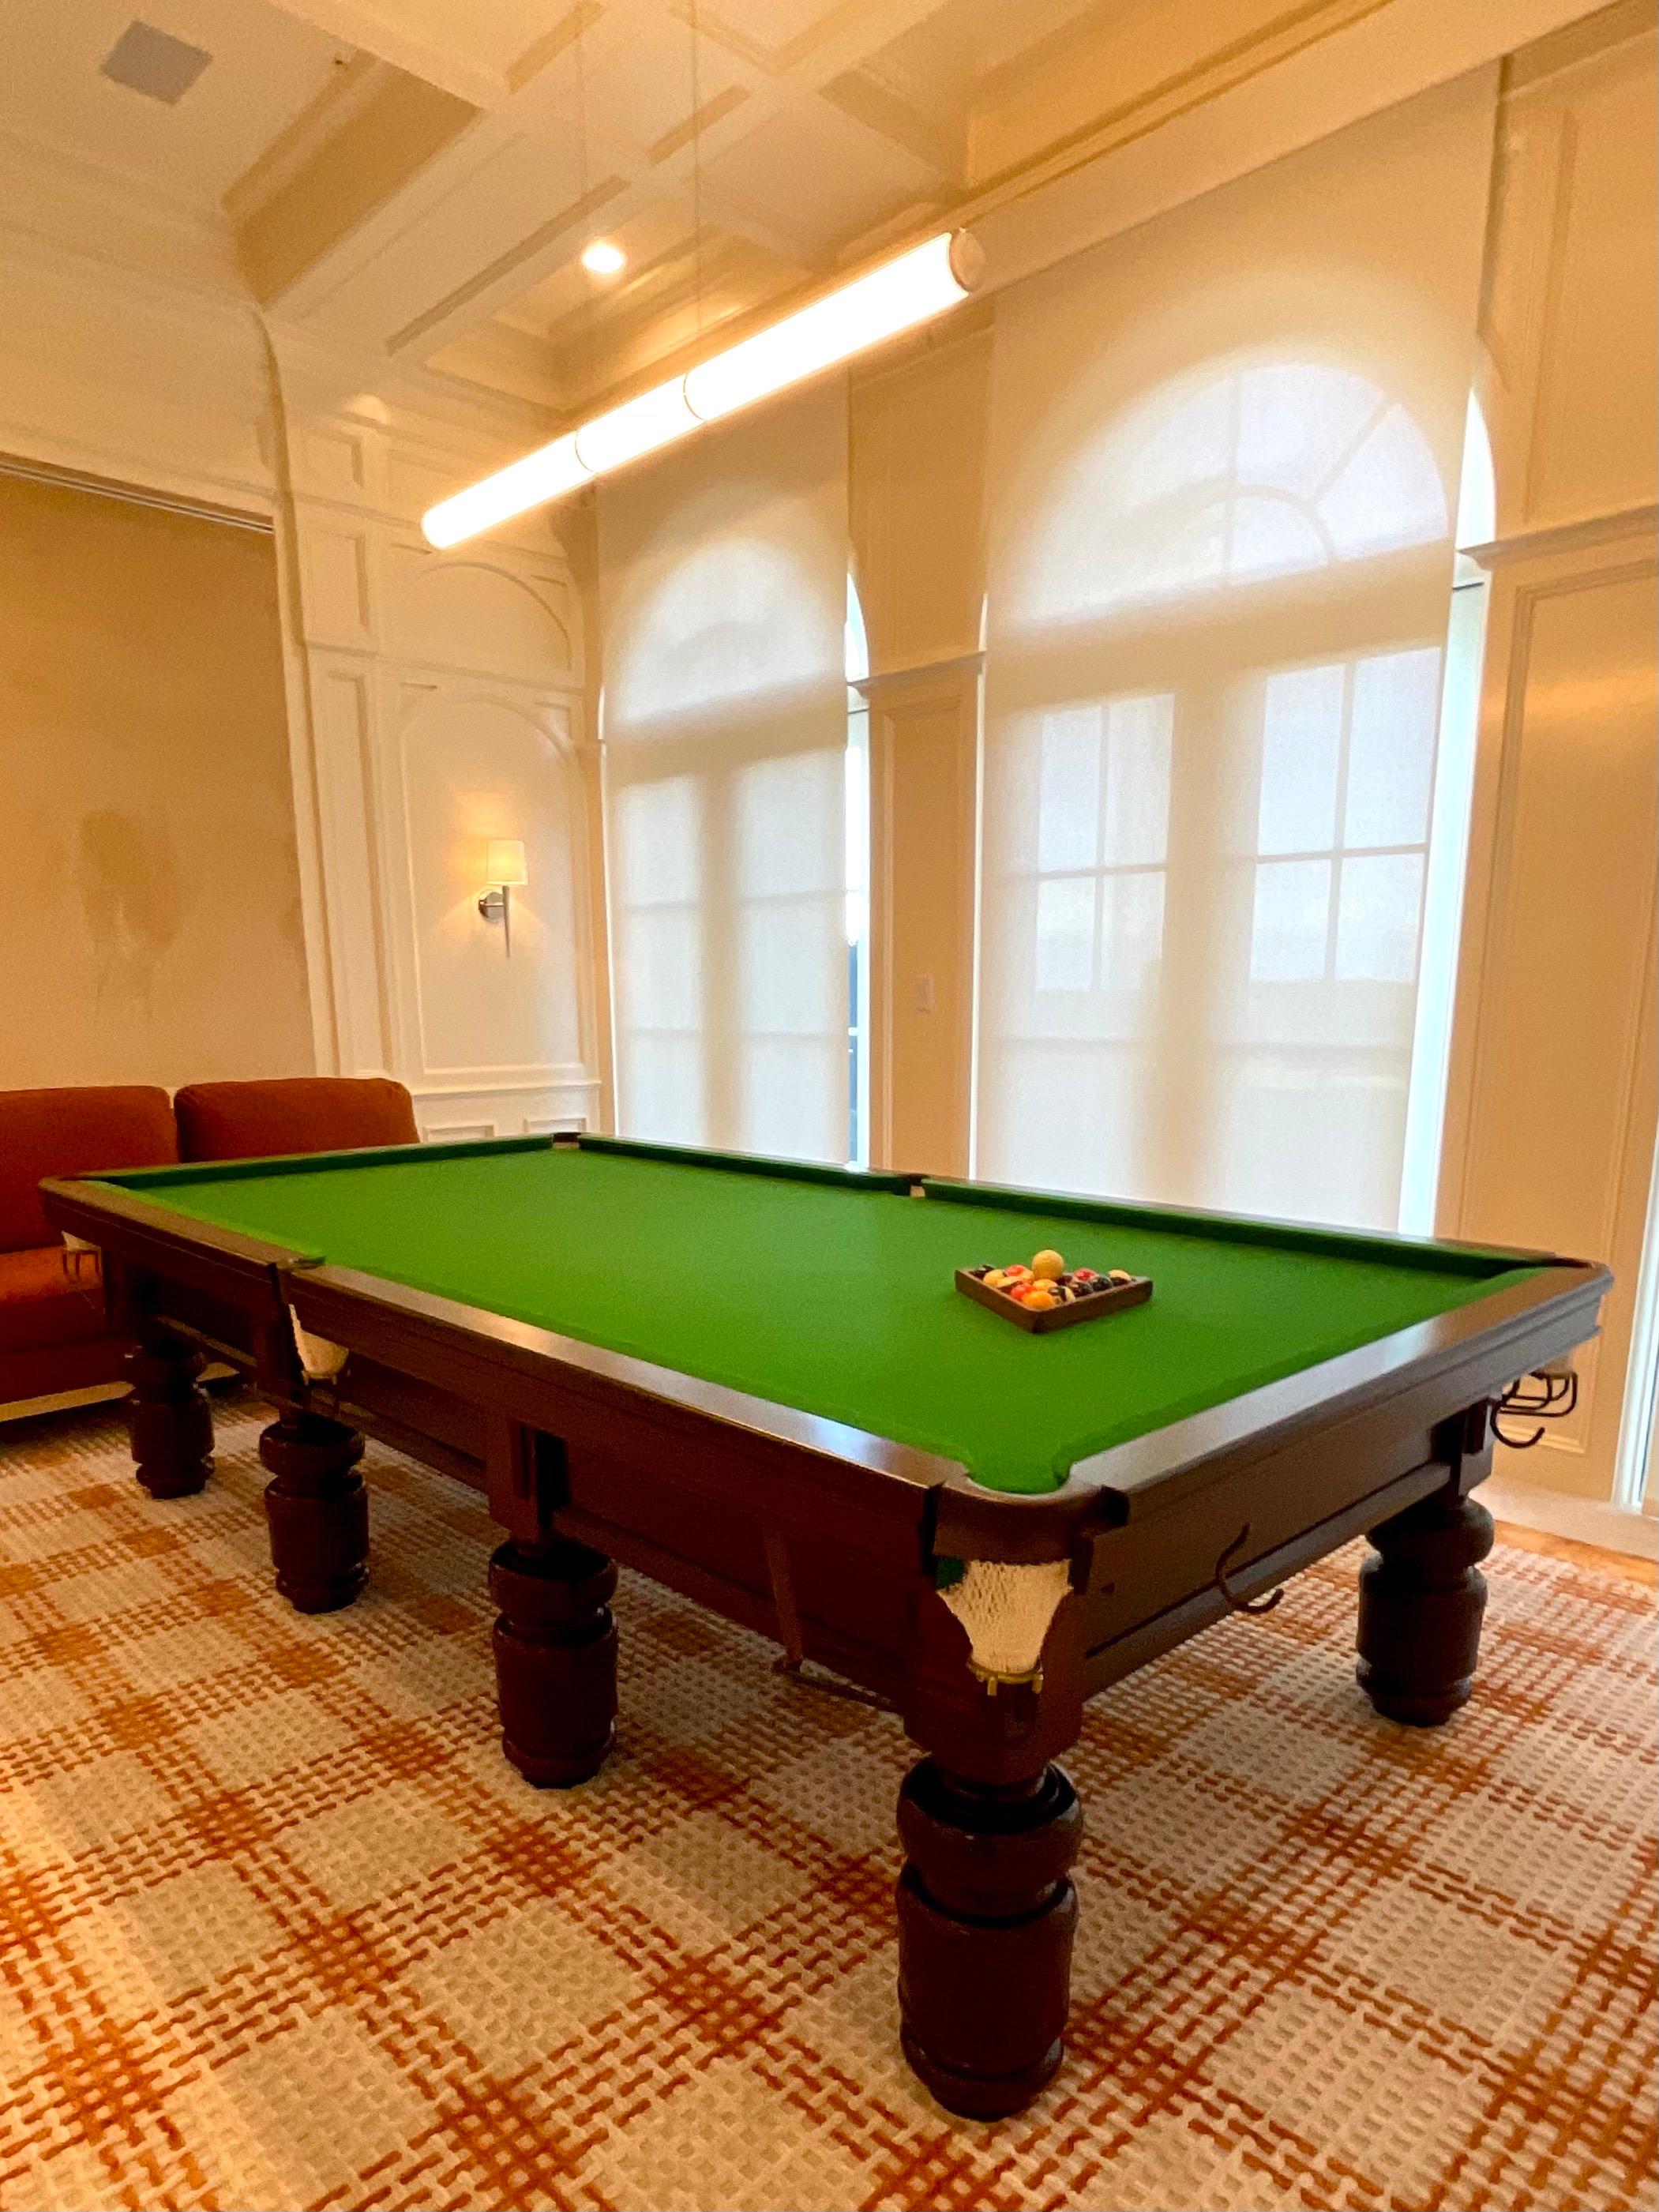 Spectacular vintage custom built Juan Pablo Molyneux pool table. Beautiful hand turned legs with a commanding profile. A real beauty. Hails from the stunning Palm Beach estate of Casino legend Steve Wynn. A great addition to any collectors list.